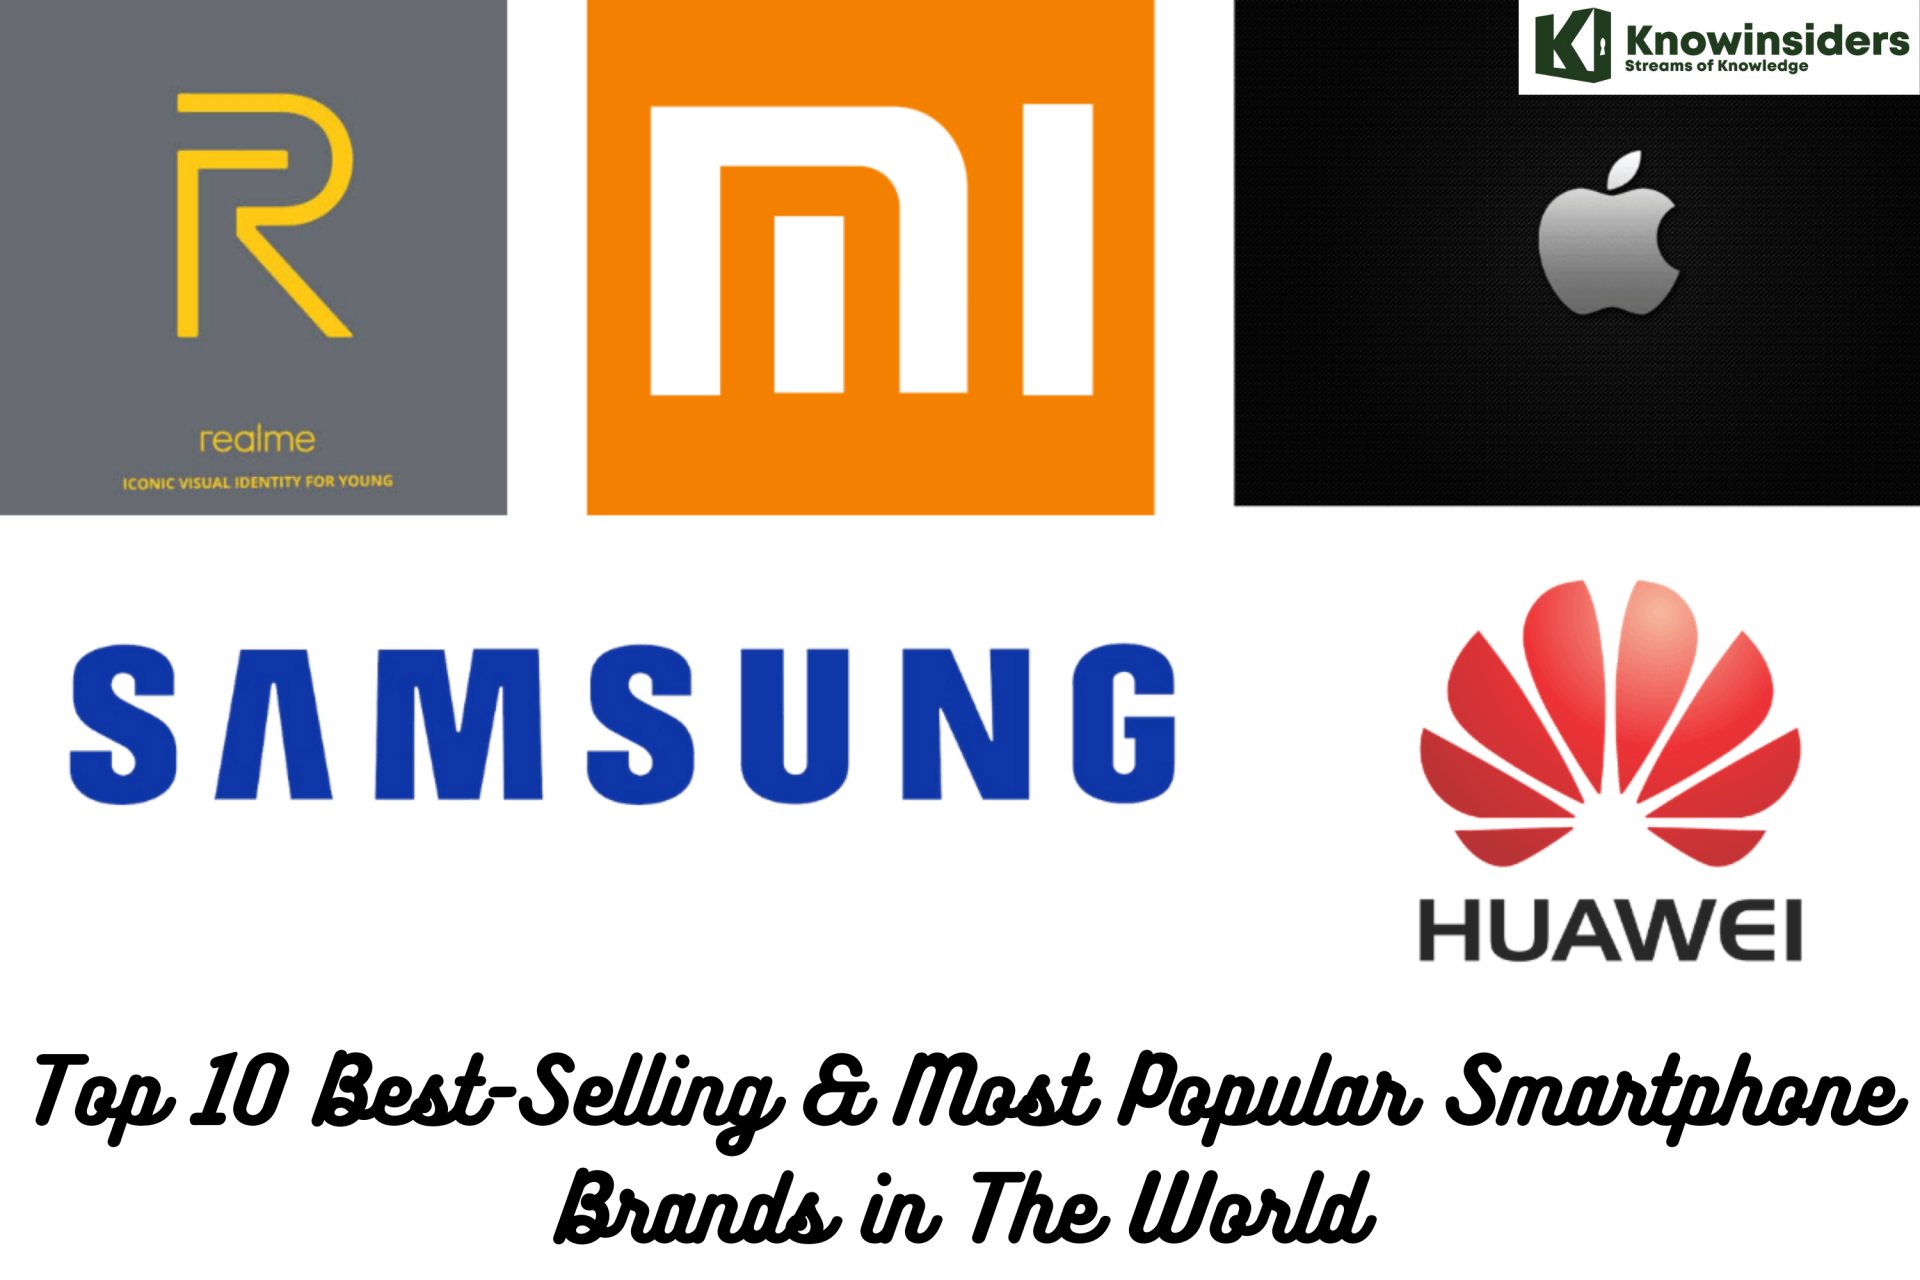 Top 10 Best-Selling & Most Popular Smartphone Brands in The World